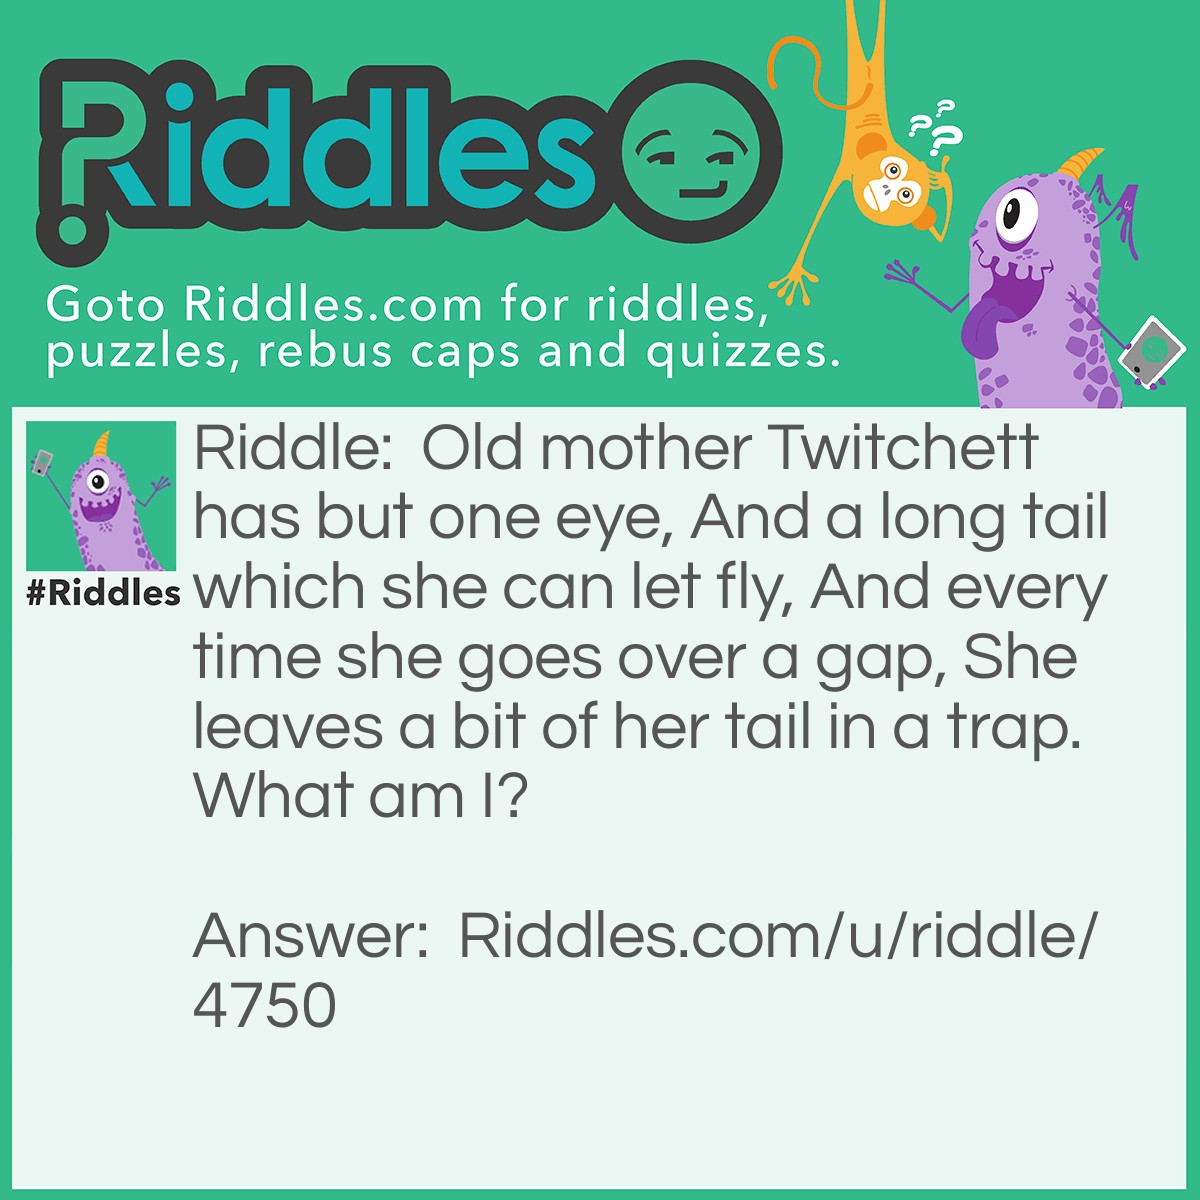 Riddle: Old mother Twitchett has but one eye, And a long tail which she can let fly, And every time she goes over a gap, She leaves a bit of her tail in a trap. What am I? Answer: A needle and thread.